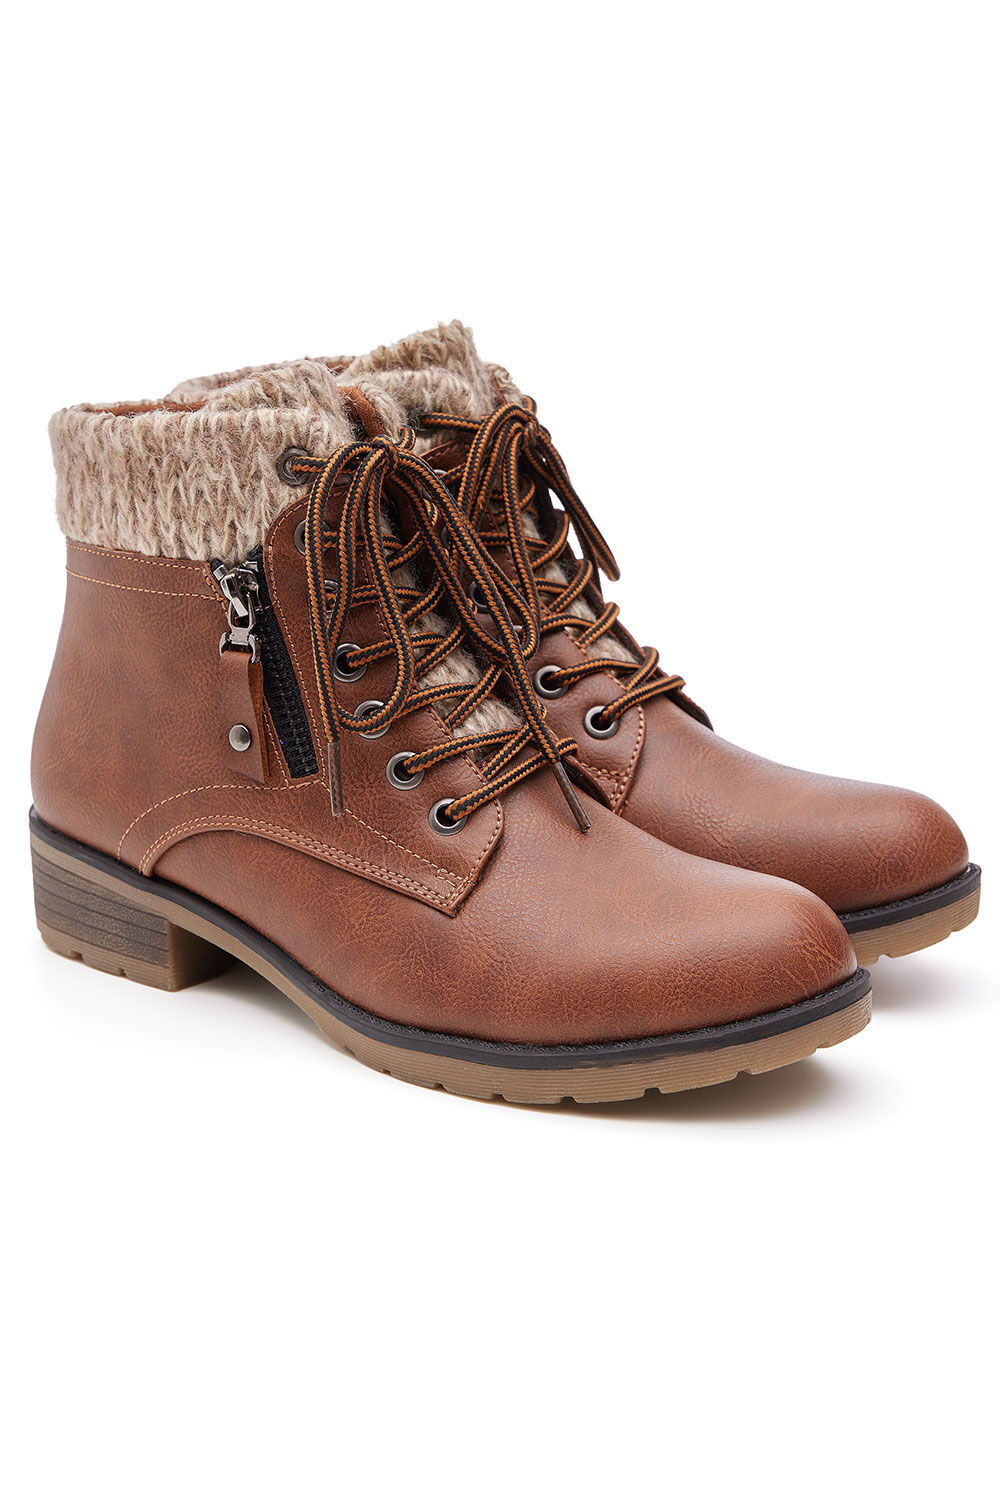 Cushion Walk Tan - Lace Up Heeled Ankle Boots With Knitted Detail, Size: 3